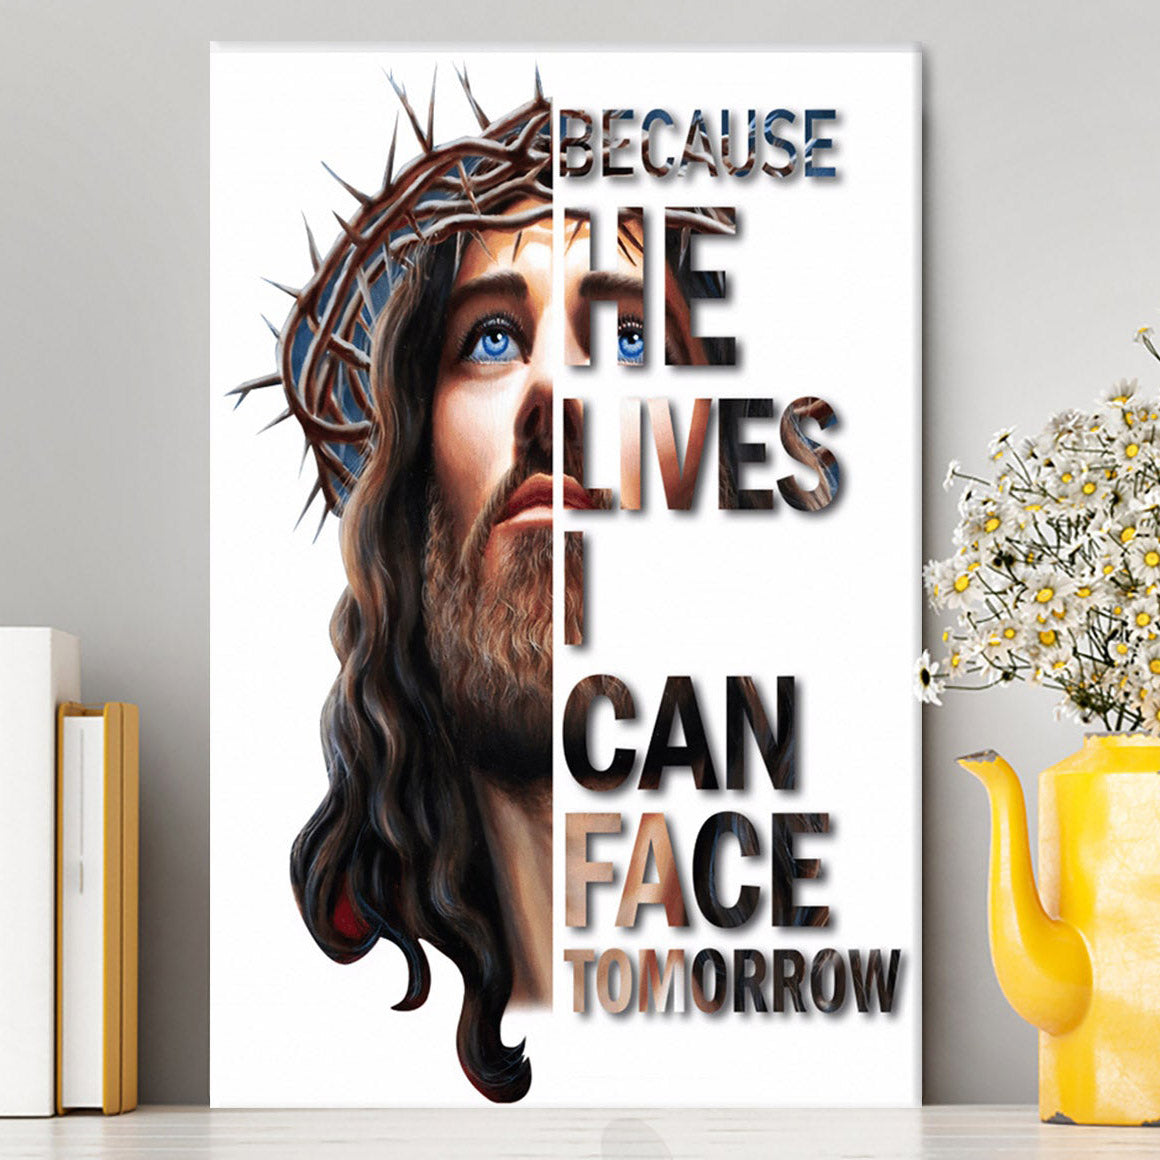 Jesus Because He Lives I Can Face Tomorrow Canvas Prints - Jesus Christ Canvas Art - Christian Wall Decor